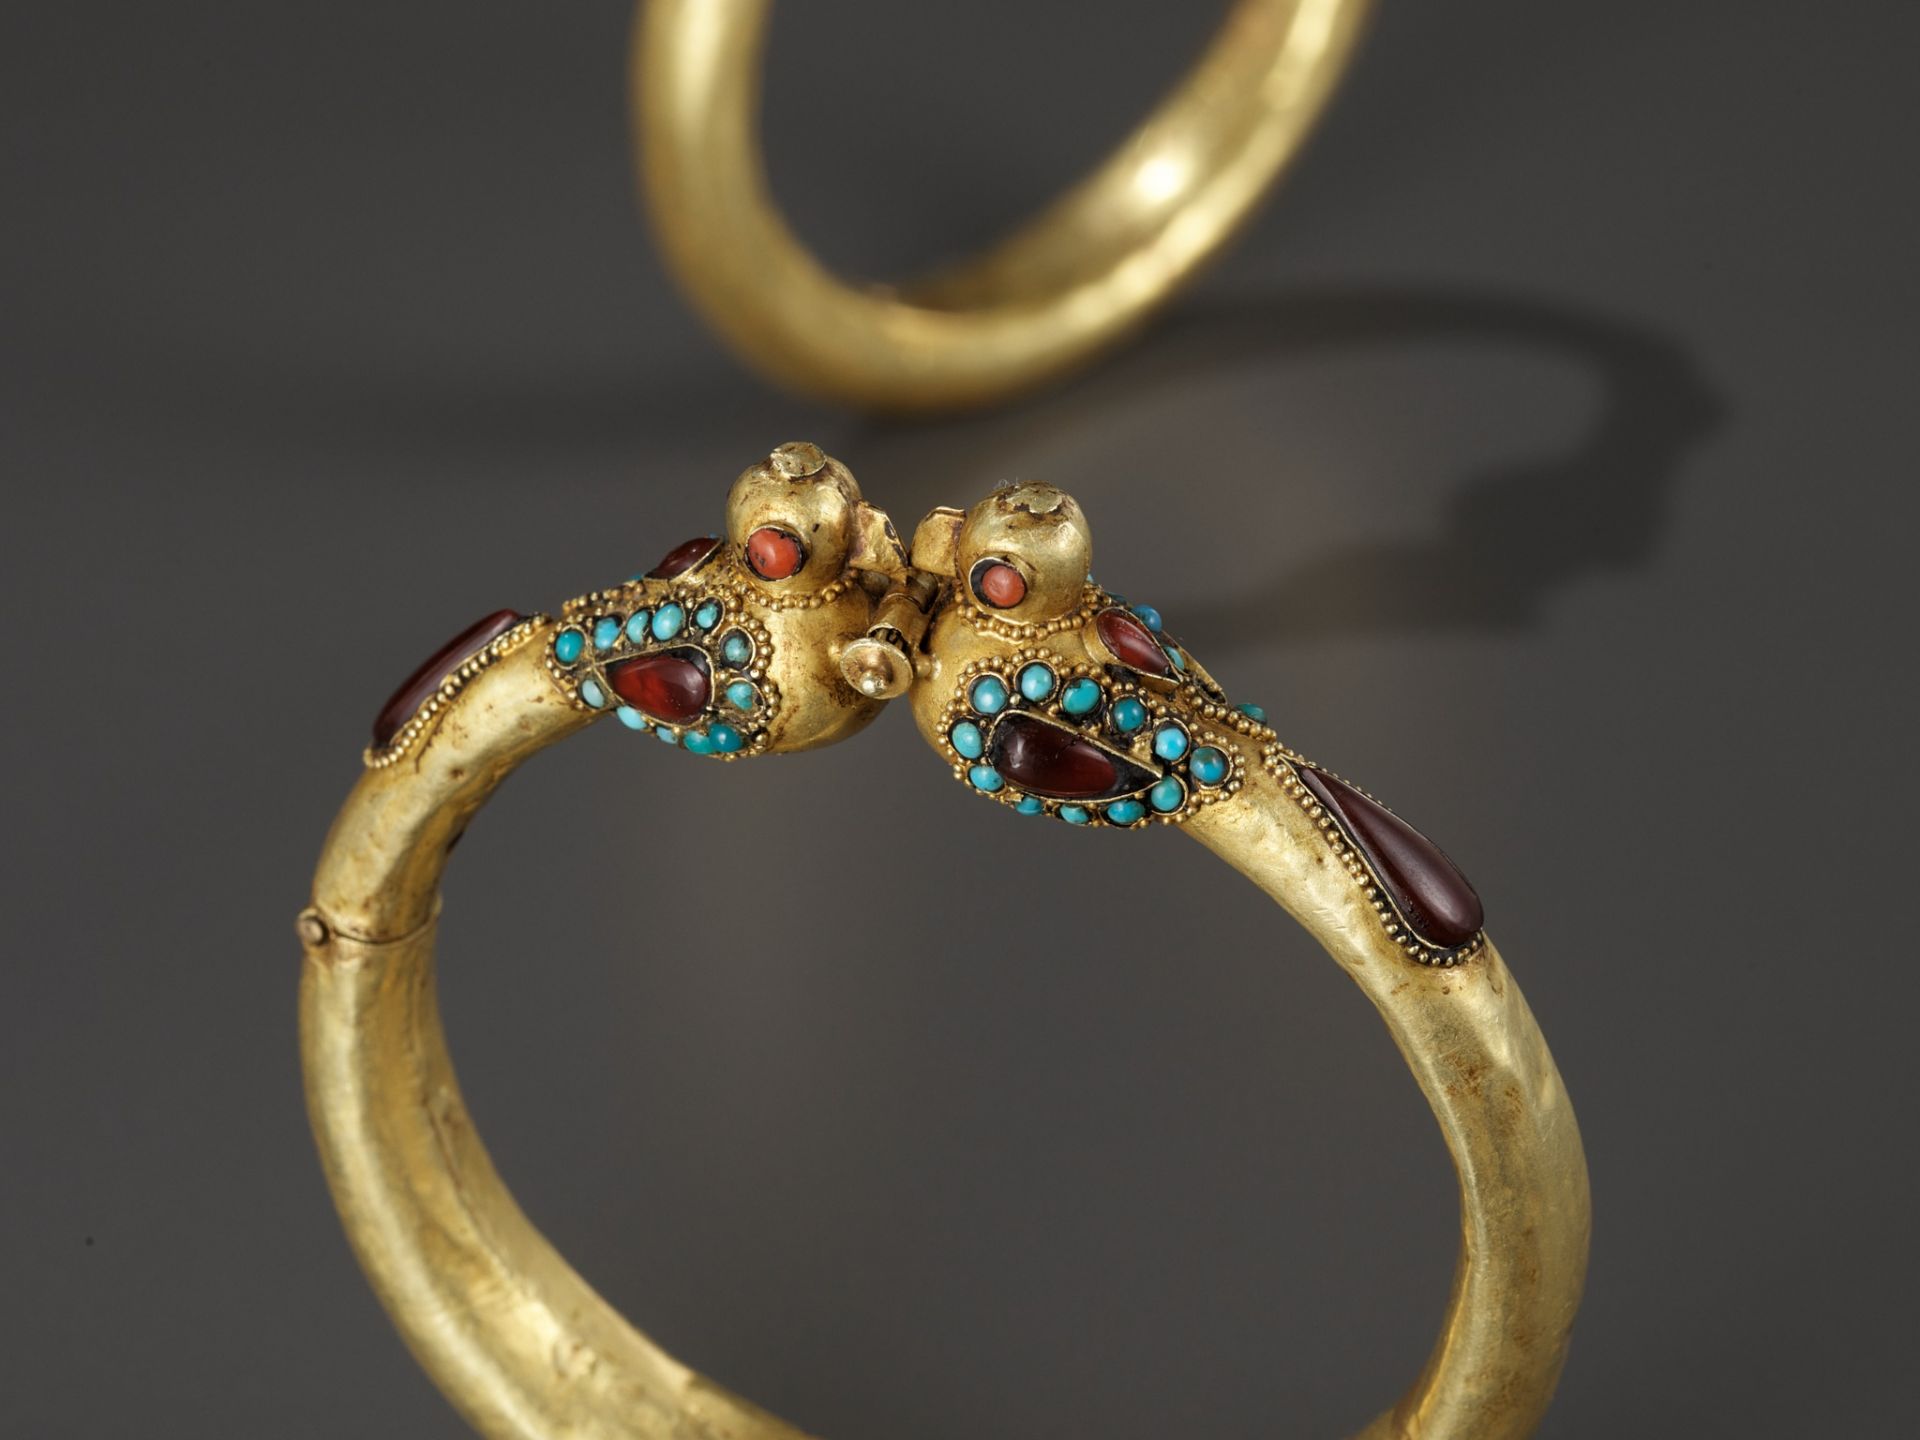 A PAIR OF GOLD 'BIRD' BANGLES, PERSIA, 11TH TO 12TH CENTURY - Image 3 of 9